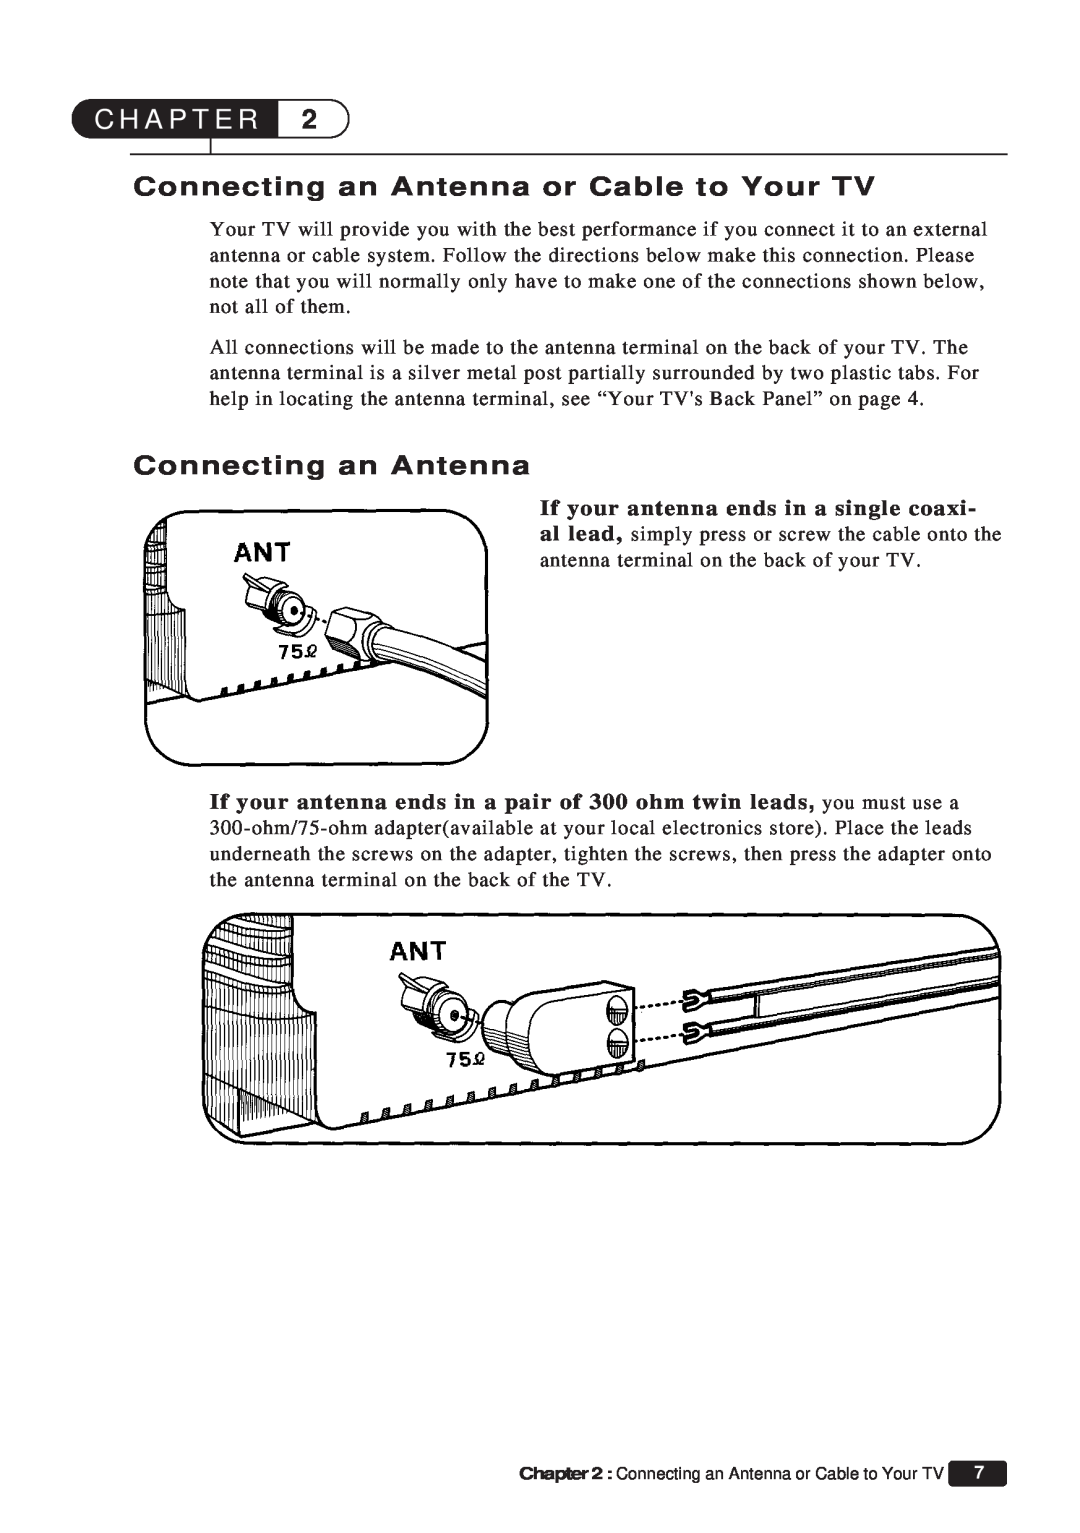 Daewoo ET 19P2, ET 13P2 instruction manual Connecting an Antenna or Cable to Your TV, C H A P T E R 